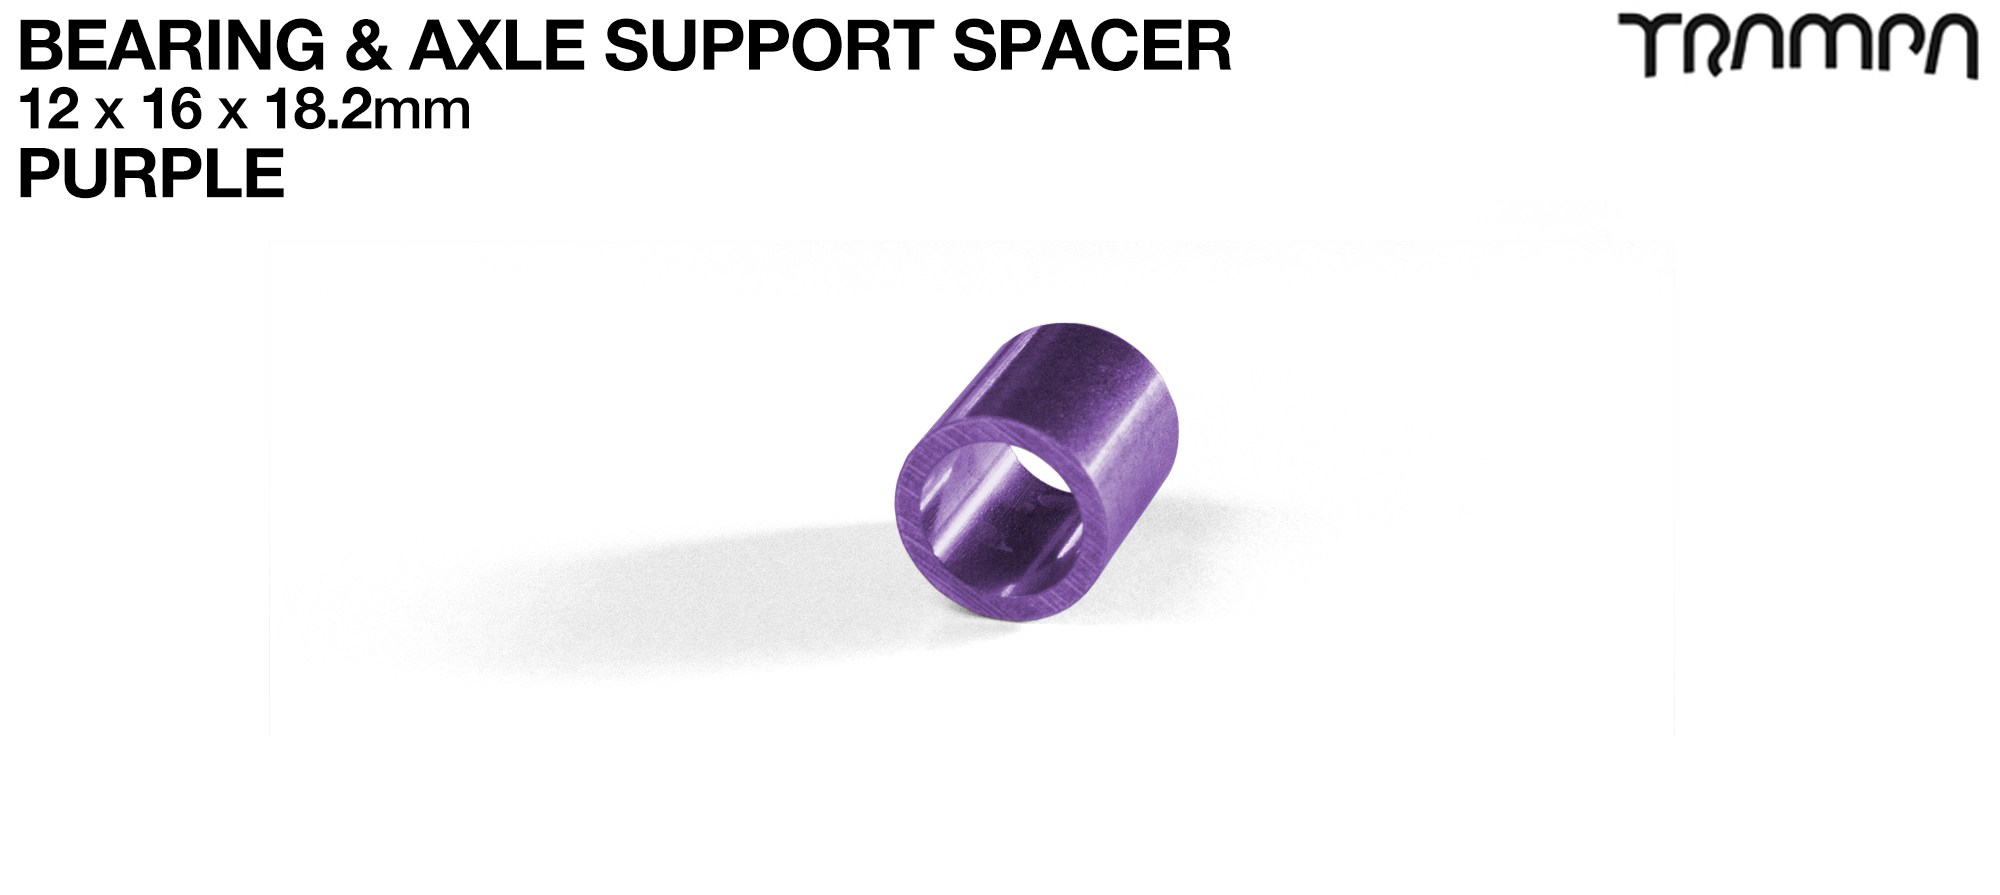 PURPLE 18.2mm Wheel Support Axle Spacers 